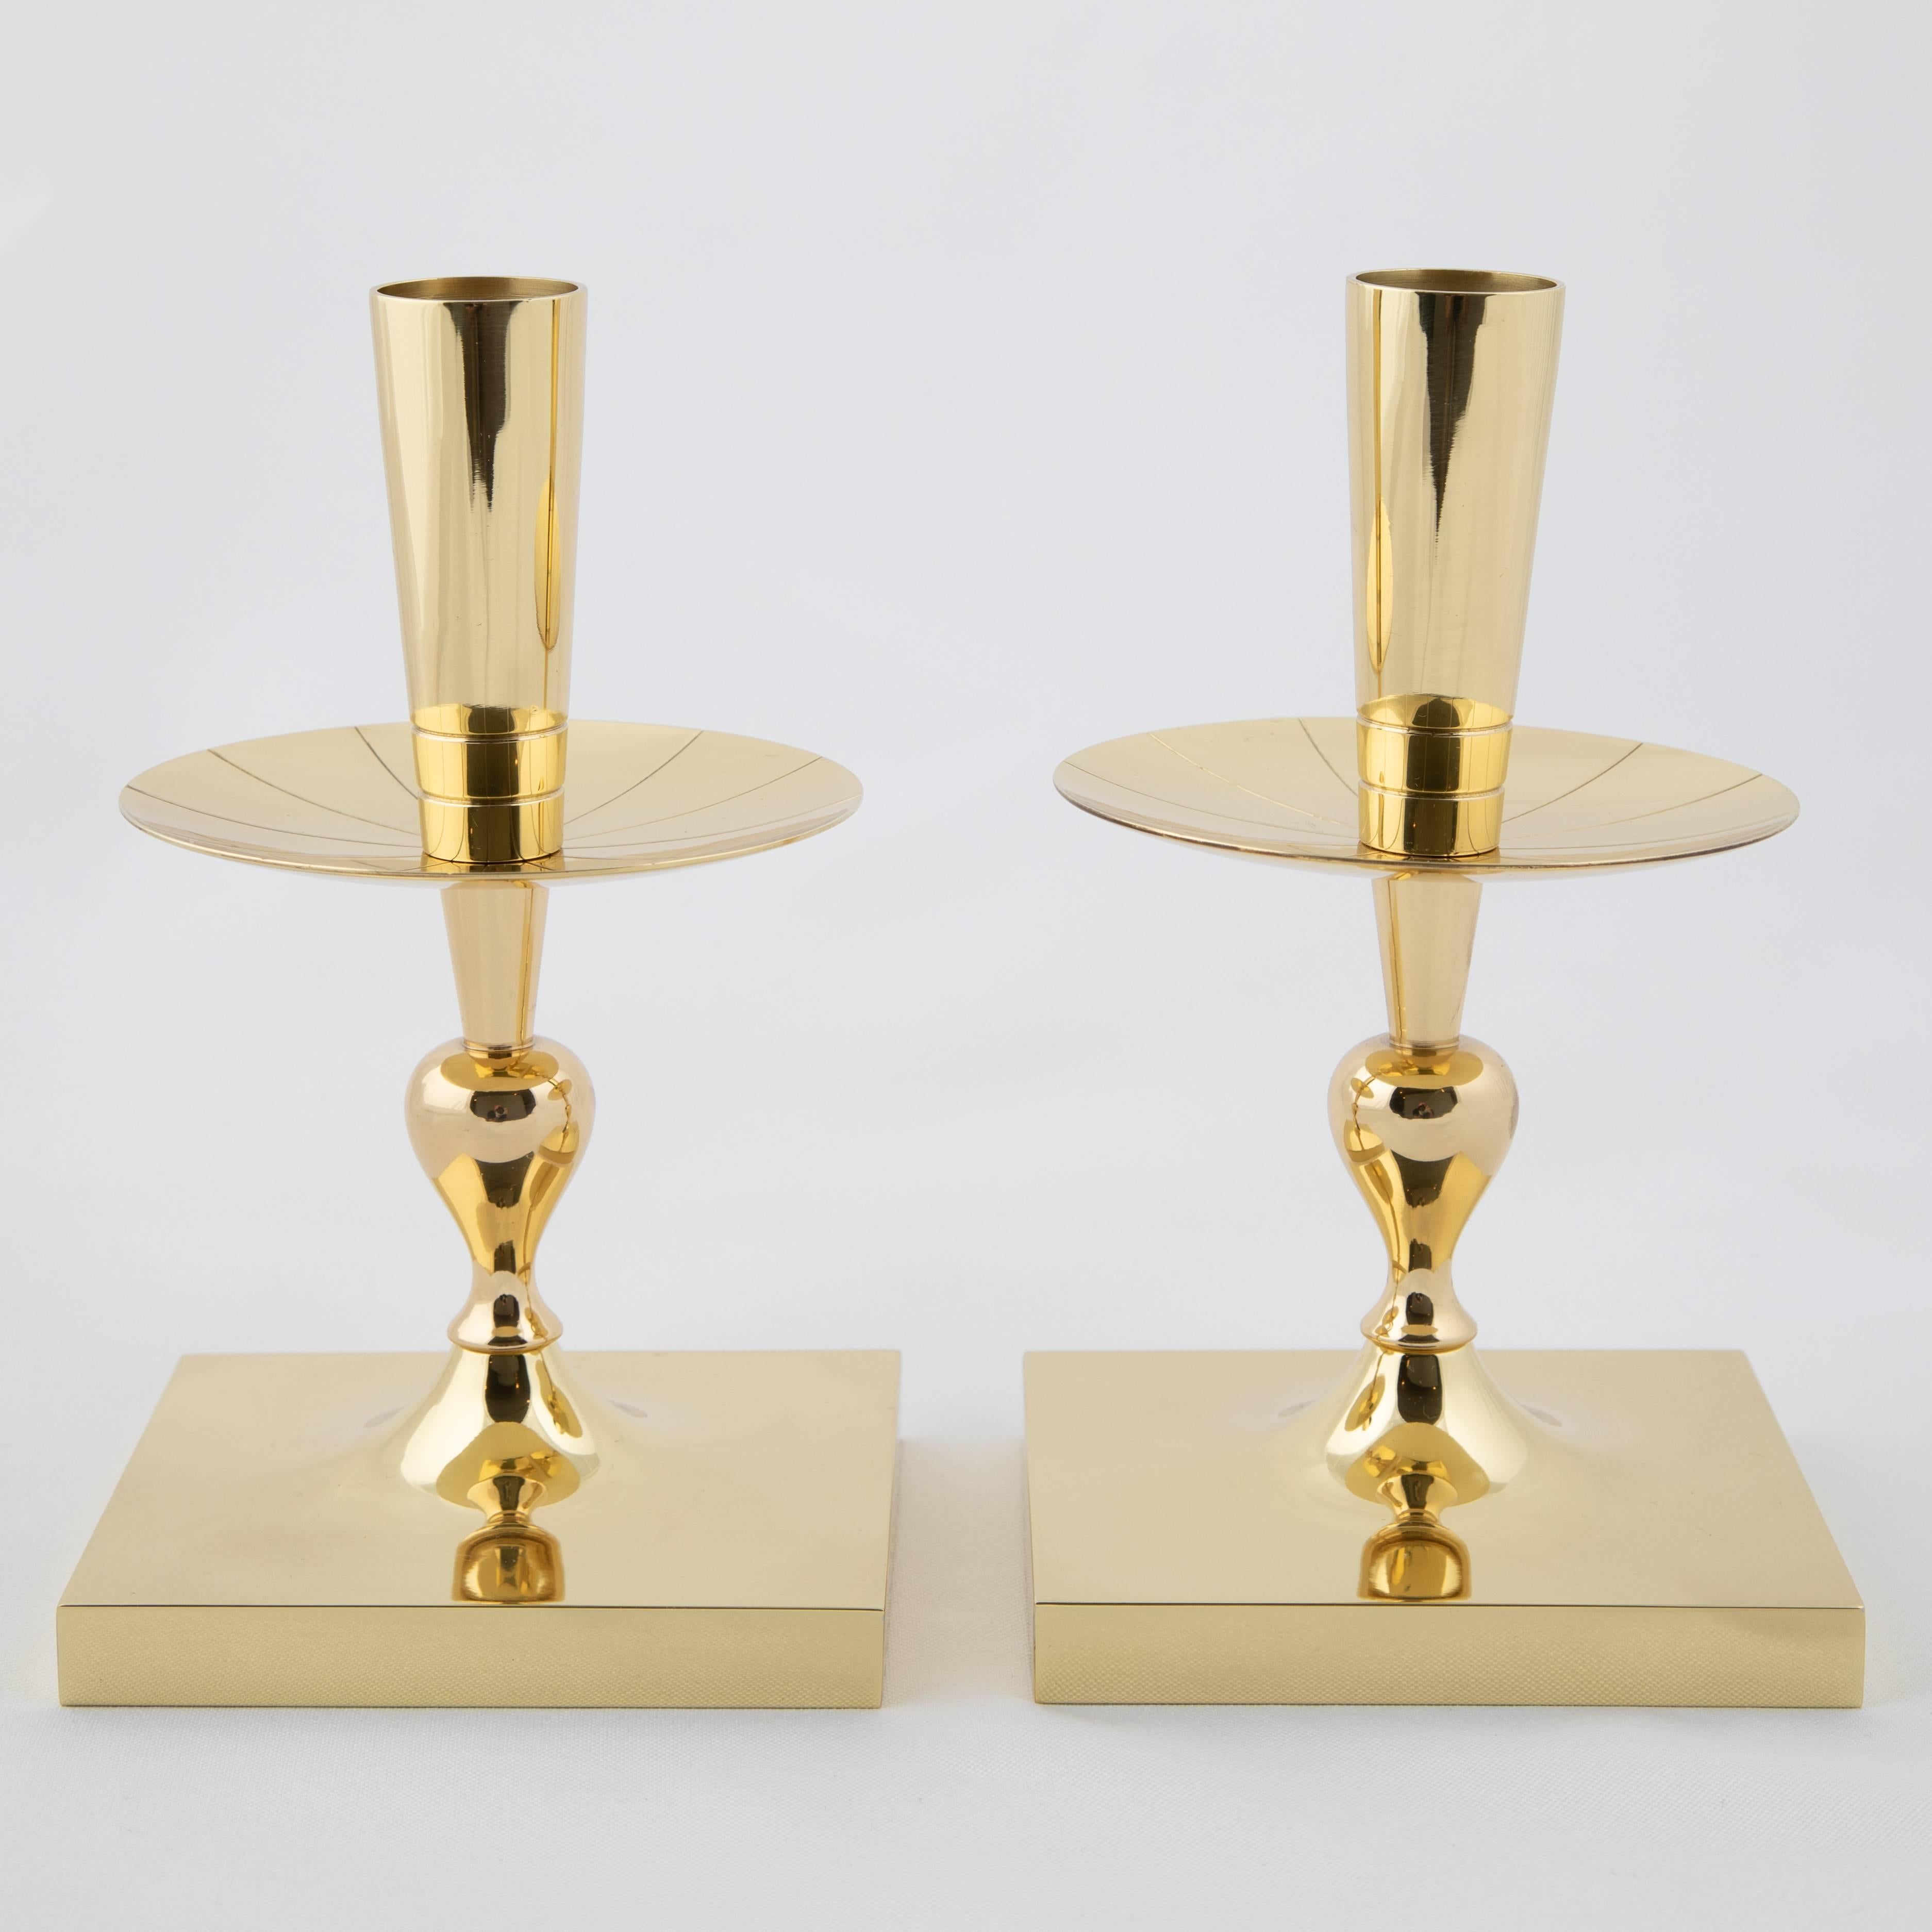 Compact pair of solid brass candleholders designed by Tommi Parzinger for Dorlyn Silversmiths. Square bases support round bobeches that feature Parzinger's signature radial incisions. Dorlyn Silversmiths stamp on underside of both.



